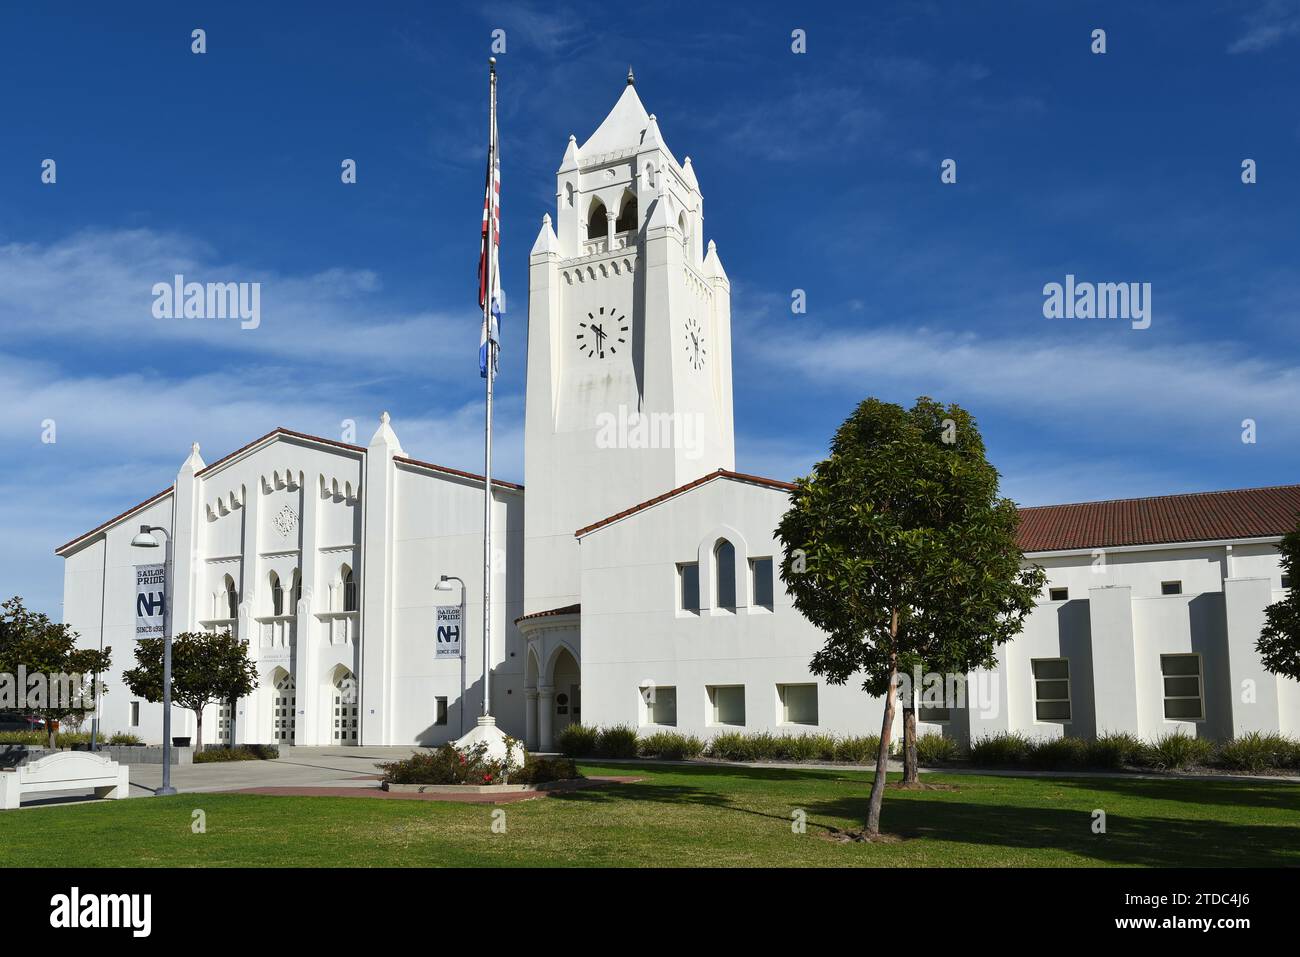 NEWPORT BEACH, CALIFORNIA - 17 DEC 2023: Newport Harbor High School with the Clock Tower and the Robbins-Loats Performing Arts Building. Stock Photo